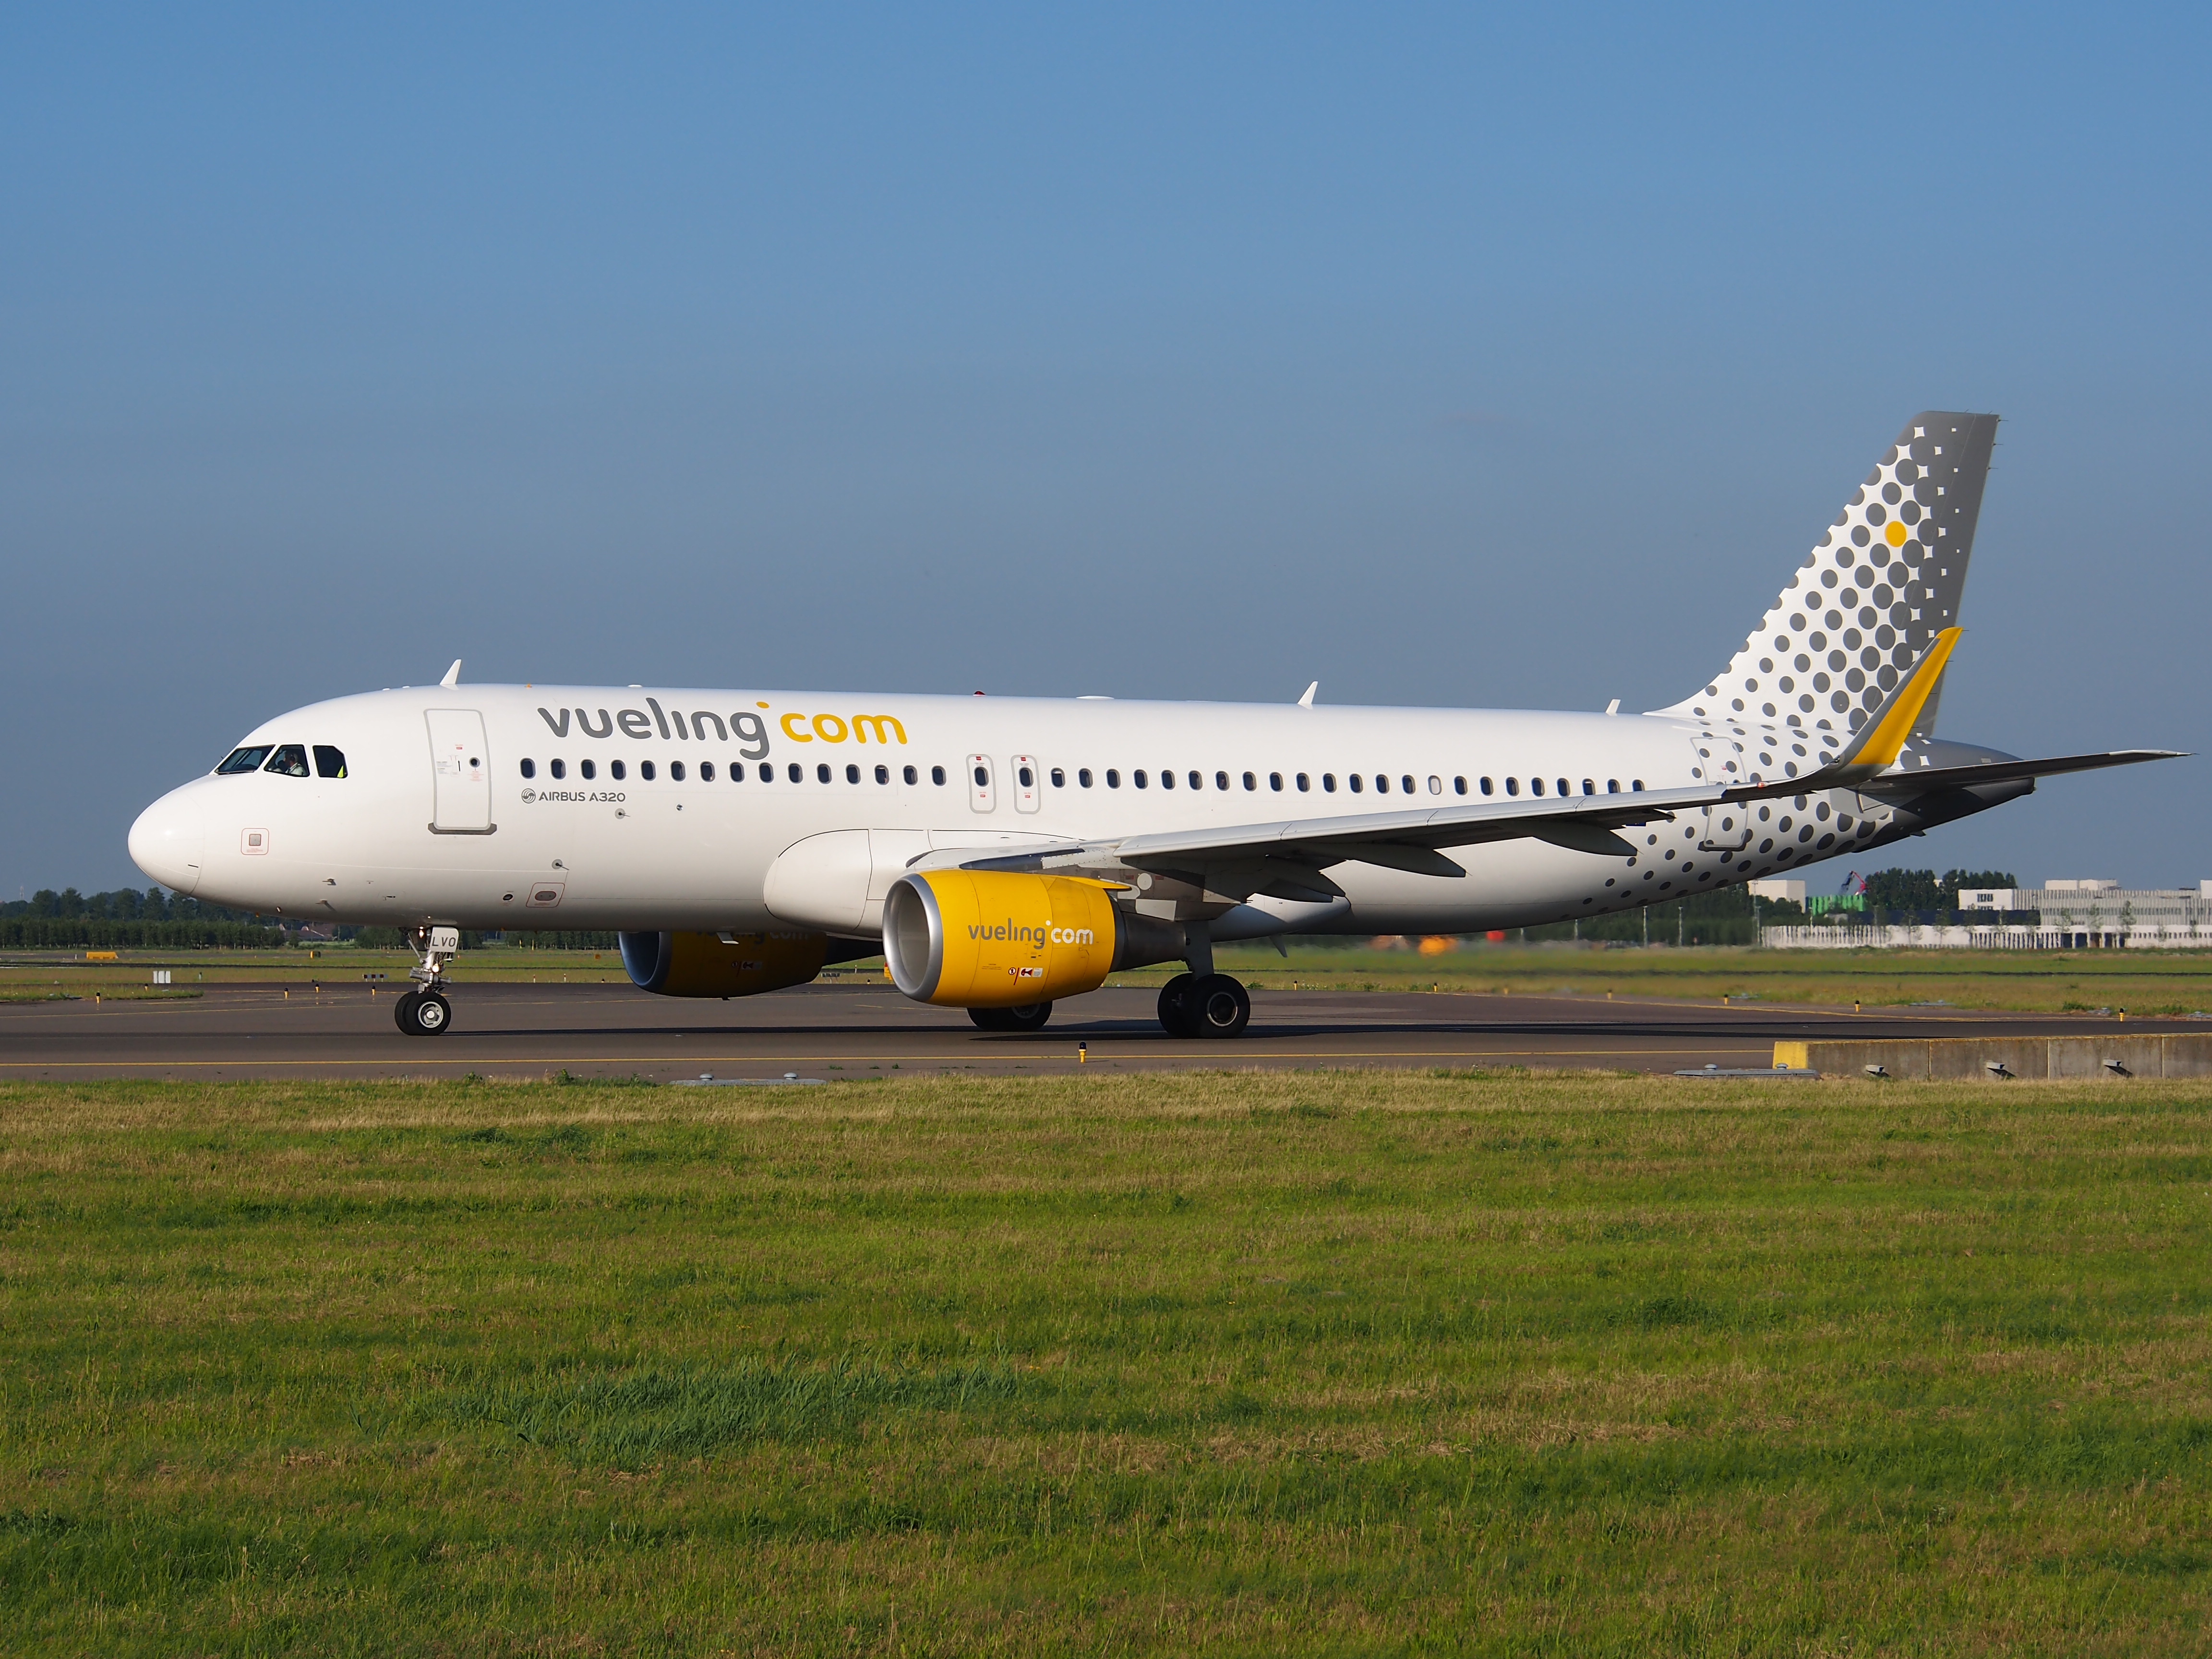 EC-LVO Vueling Airbus A320-214(WL) - cn 5533 taxiing 15july2013 pic-003